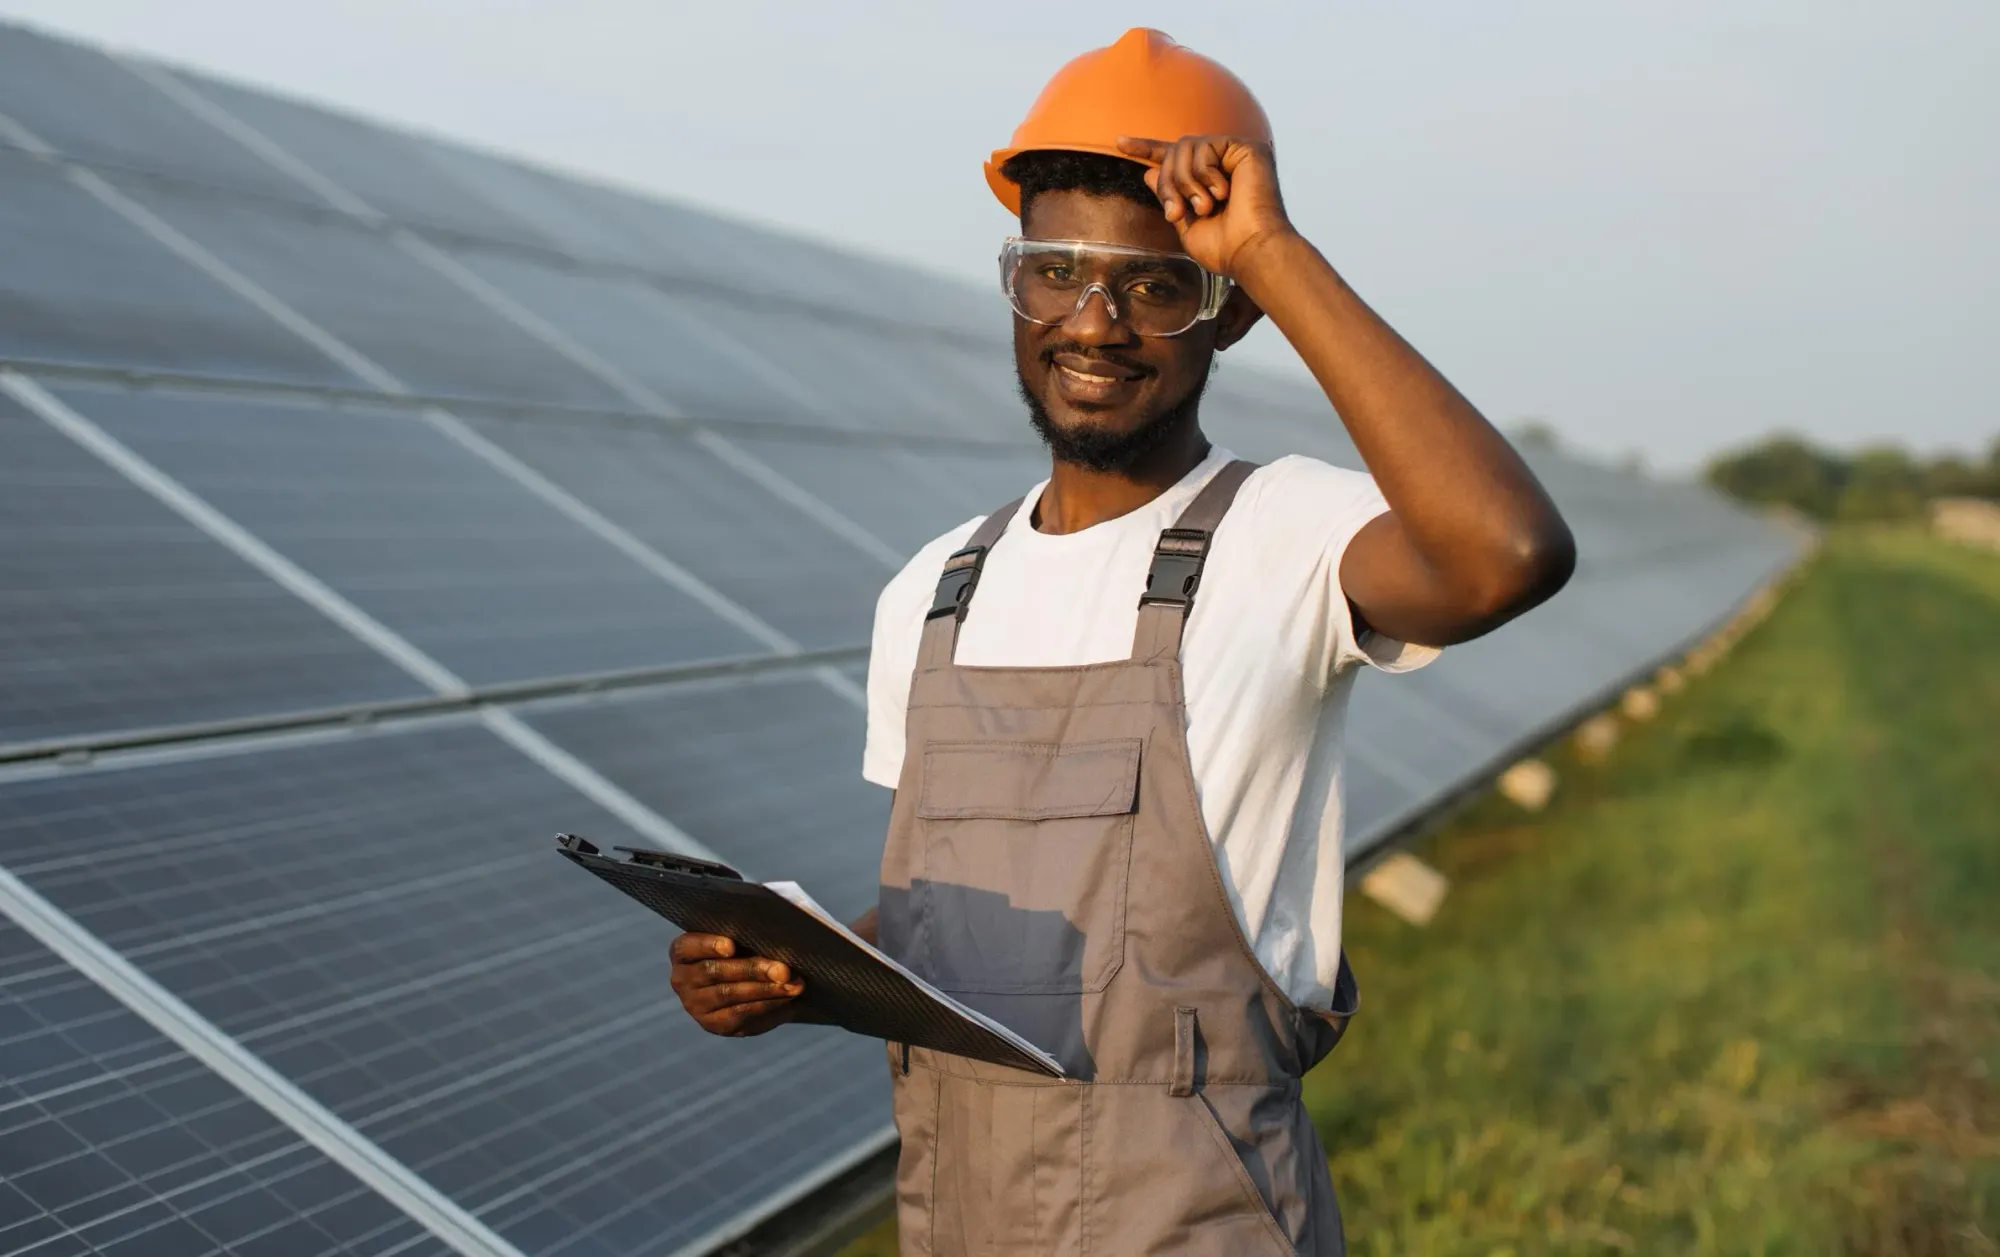 South African Solar Energy Firm Hohm Energy Secures $8 Million Seed Funding